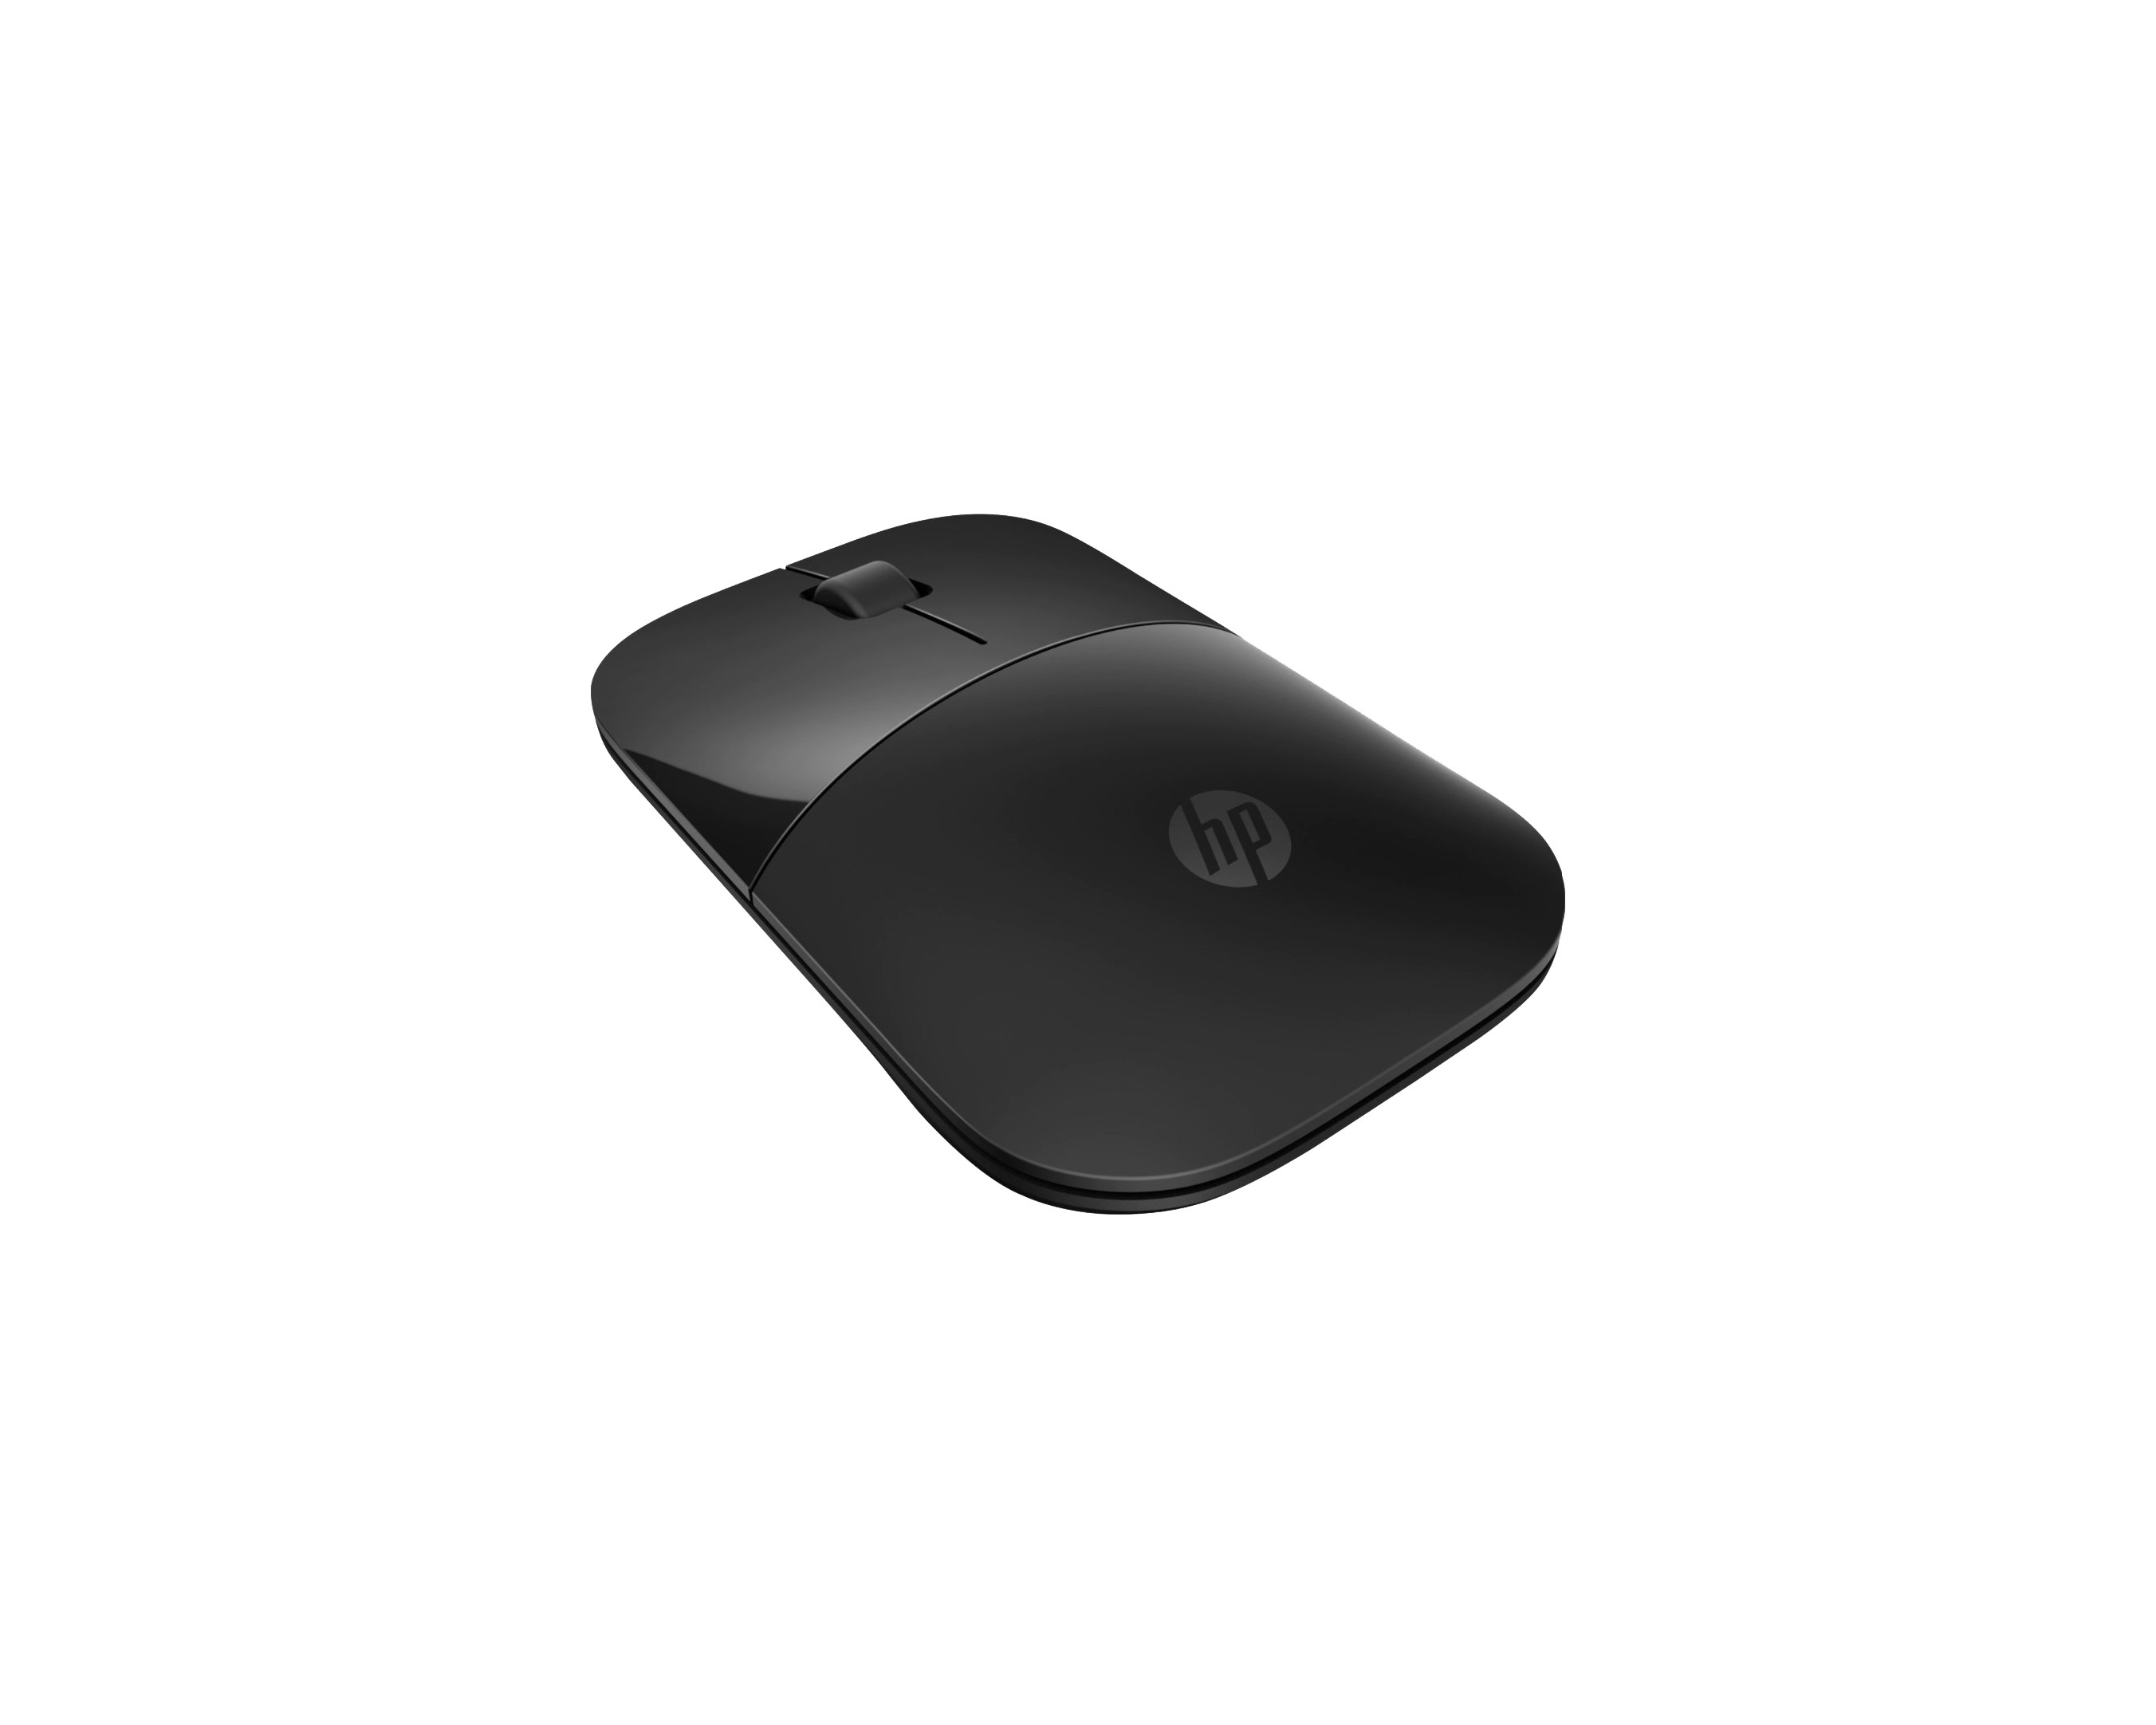 Reviewing the HP Z3700 Wireless Daily Mouse - Mail